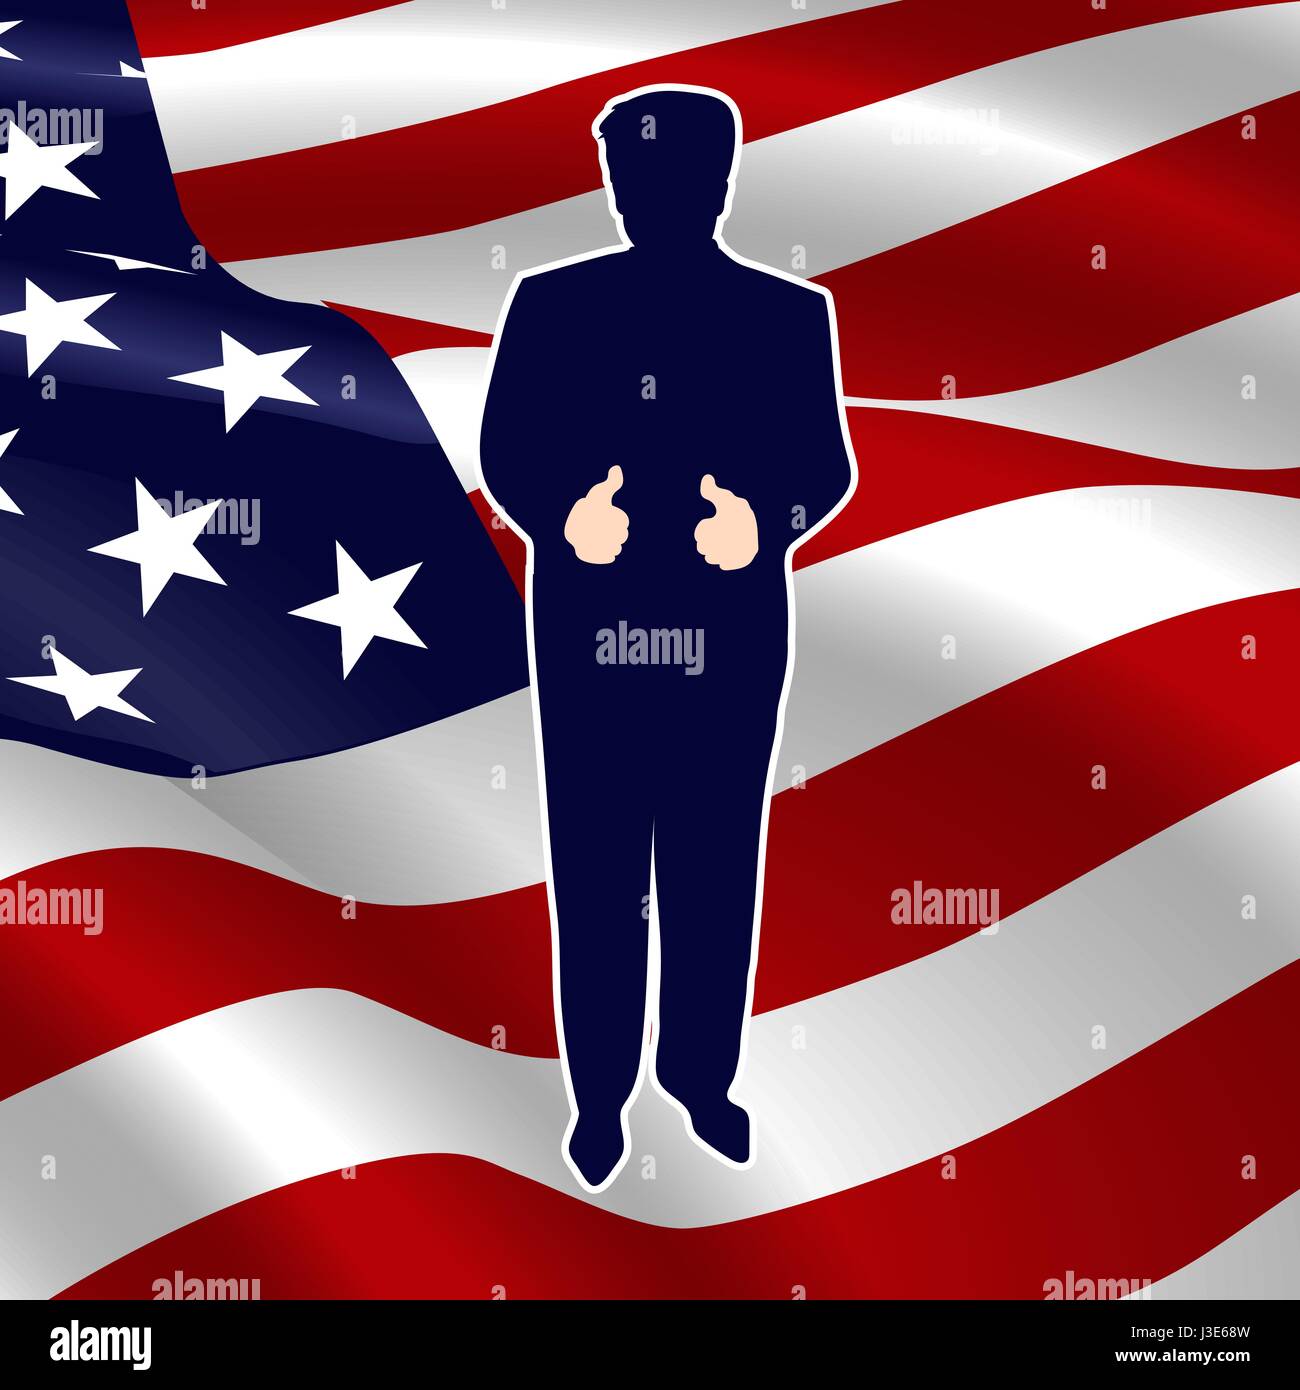 The silhouette of the President on American flag background Stock Vector